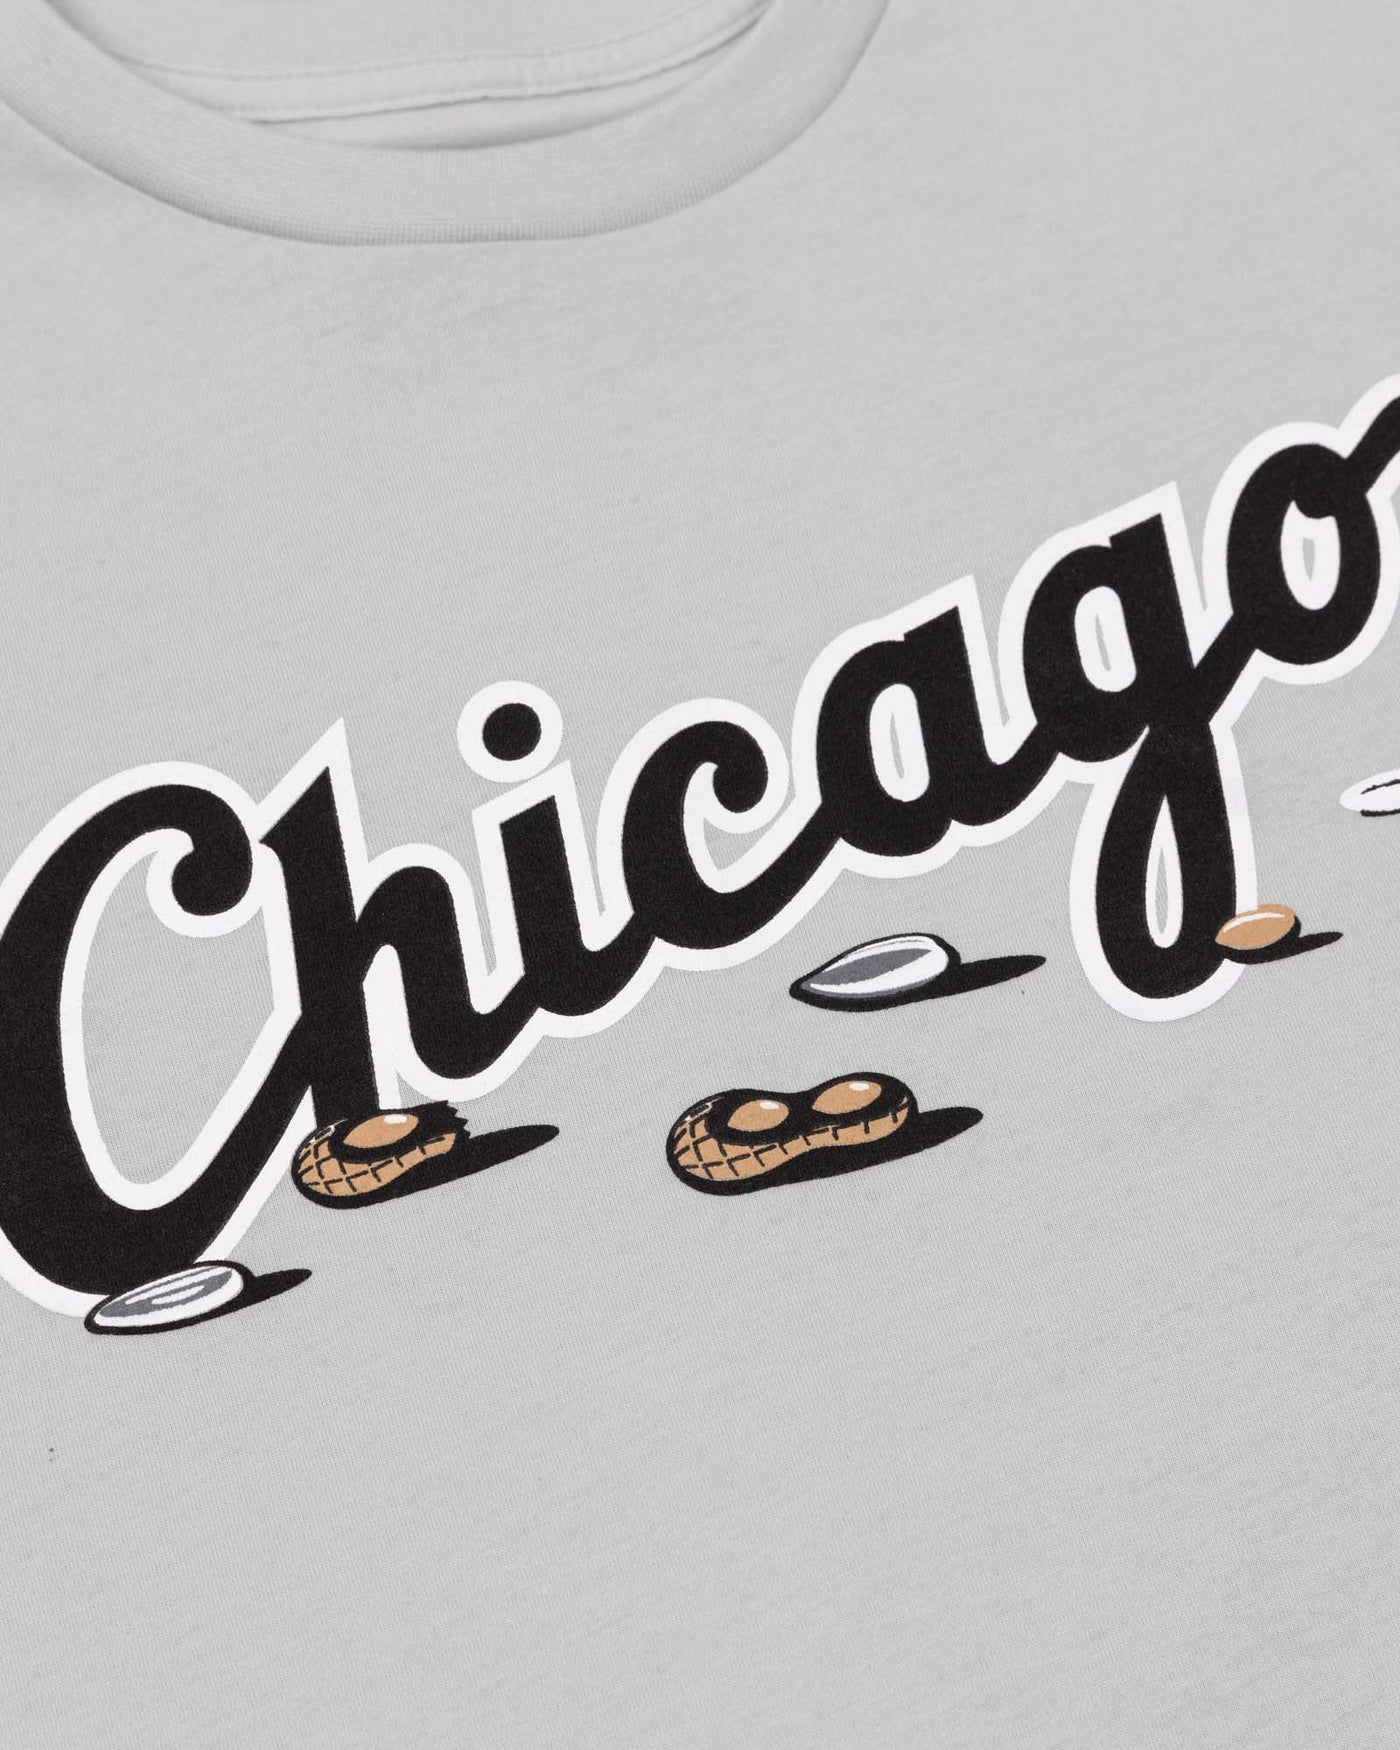 Get Your Peanuts! Women's Warm-Up Tee - Chicago White Sox